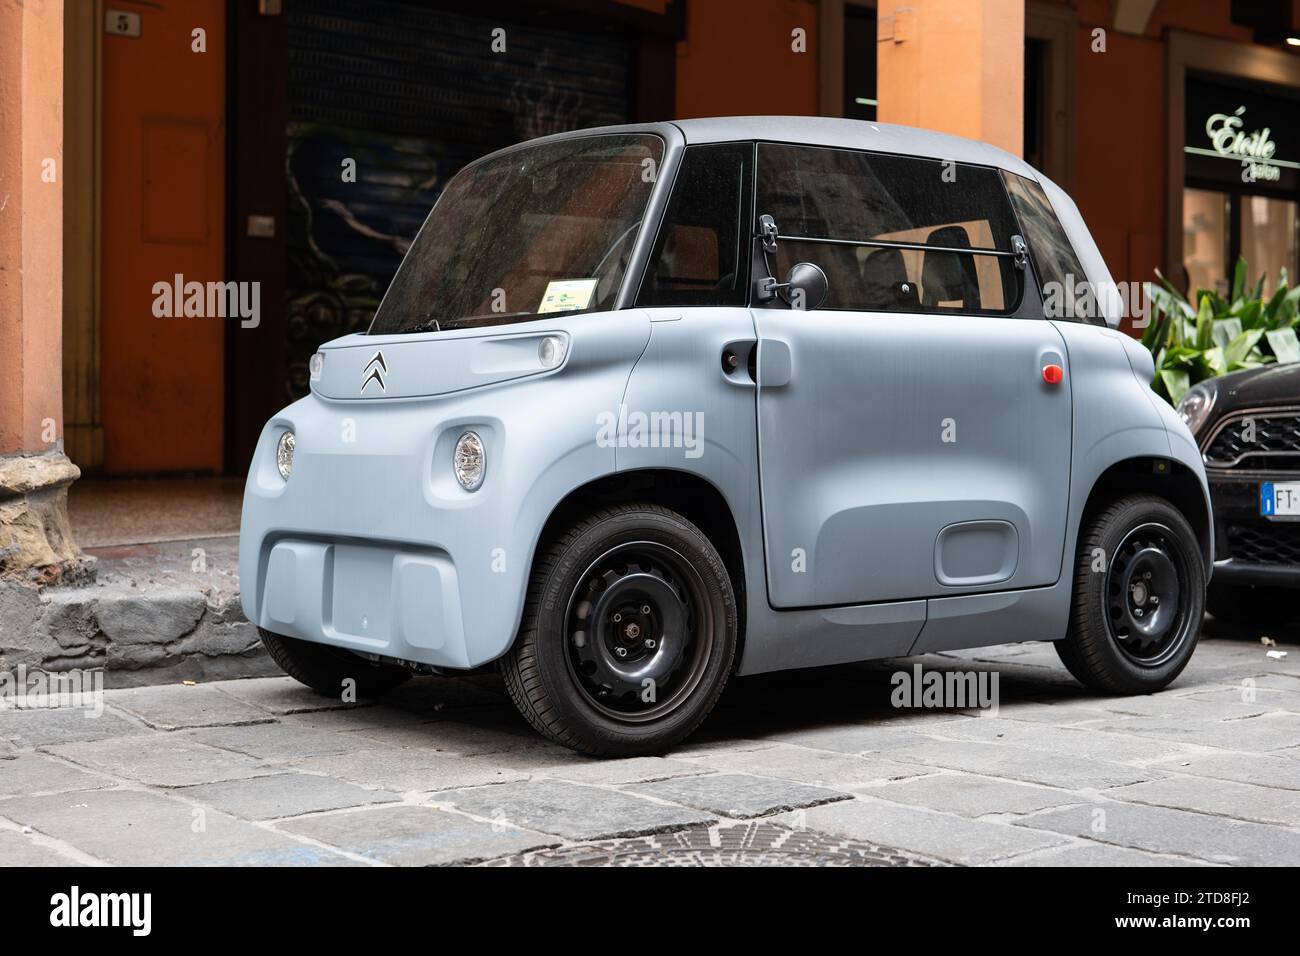 BOLOGNA, ITALY - APRIL 20, 2022: Ugly Citroen Ami One electric mini car parked on a street of Bologna Stock Photo